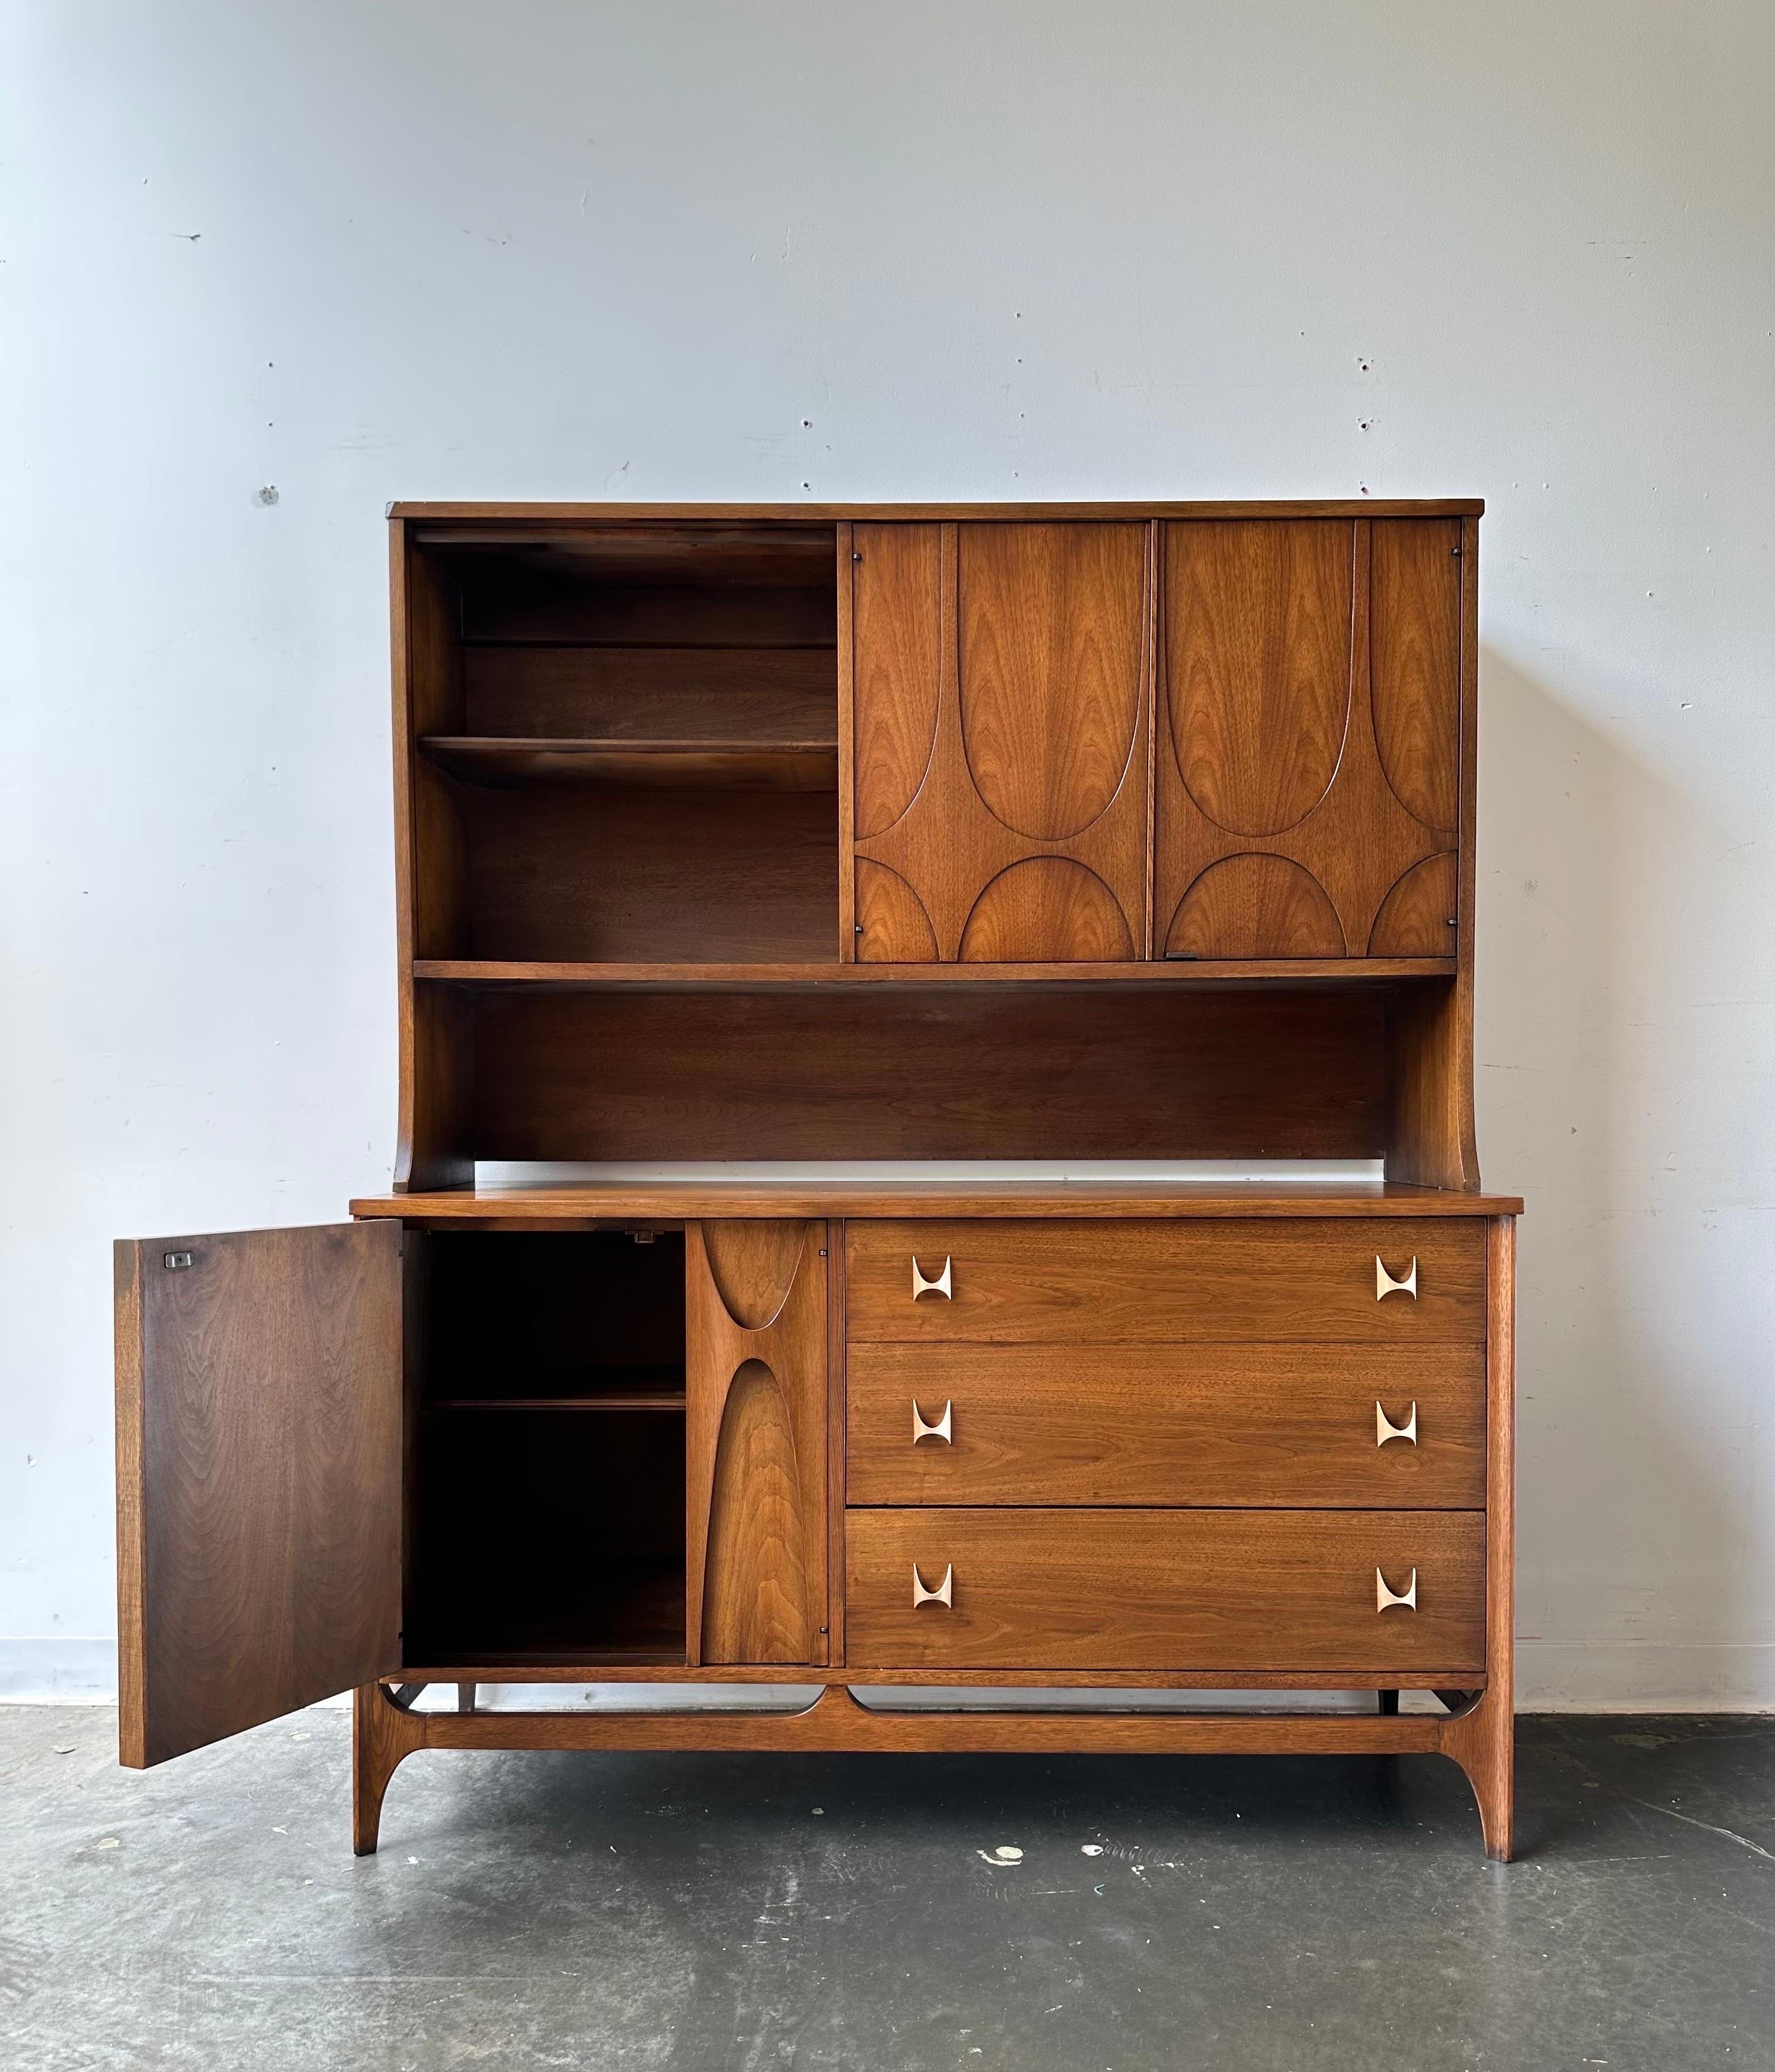 Iconic Broyhill Brasilia credenza with hutch top.

Professionally refinished piece designed by Oscar neimeryer circa 1960.

Dim:

The buffet measures: 54 wide x 19 deep x 30 inches high
The hutch measures: 54 wide x 13.5 deep x 34 inches high
The